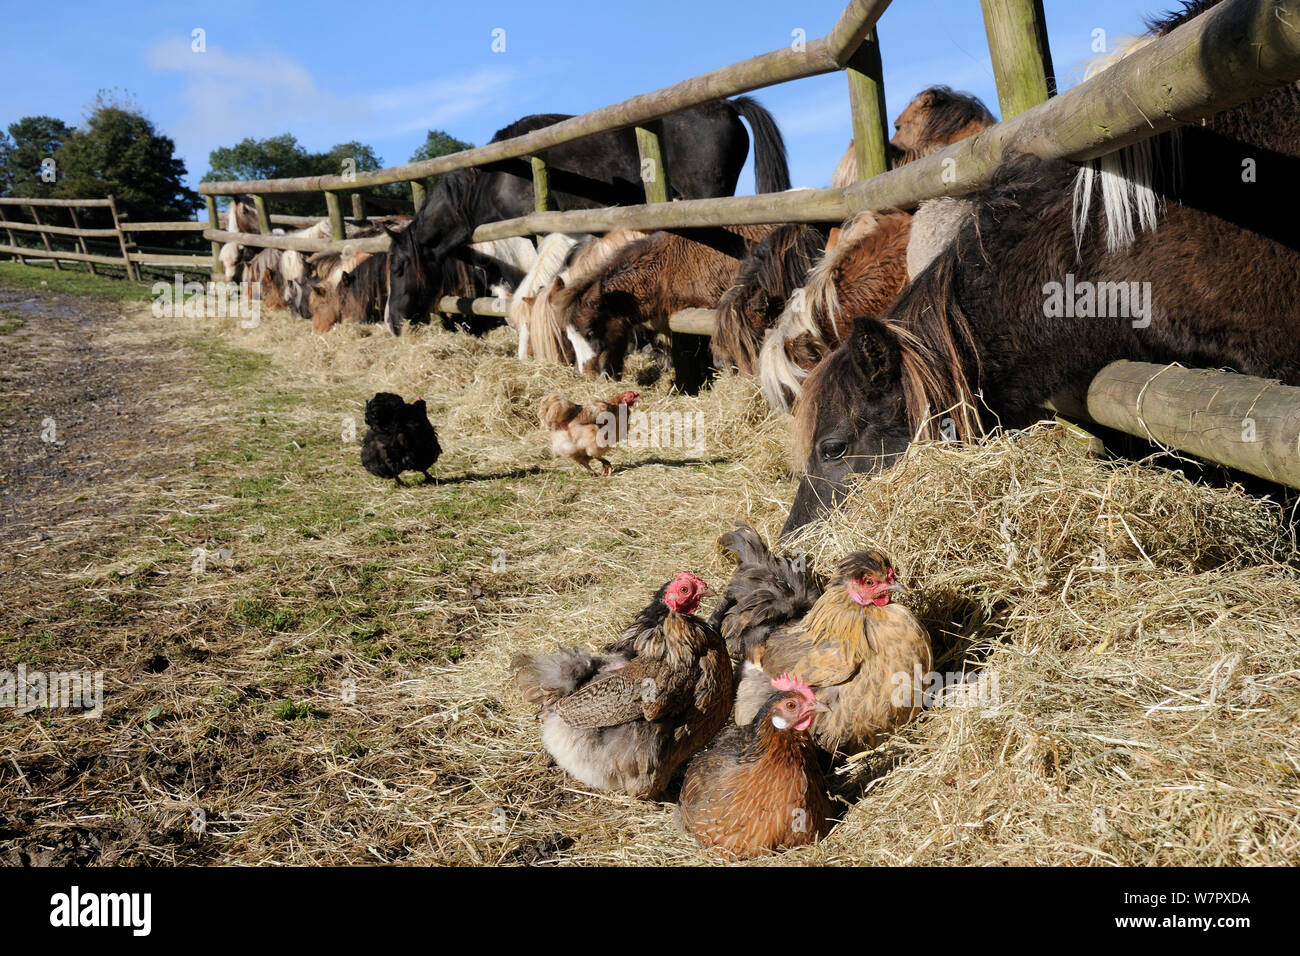 Bantam chickens (Gallus gallus domsesticus) resting in pile of hay next to a row of miniature horses and a Welsh cob (Equus caballus) reaching through a wooden fence to eat the hay, Wiltshire, UK, October. Stock Photo